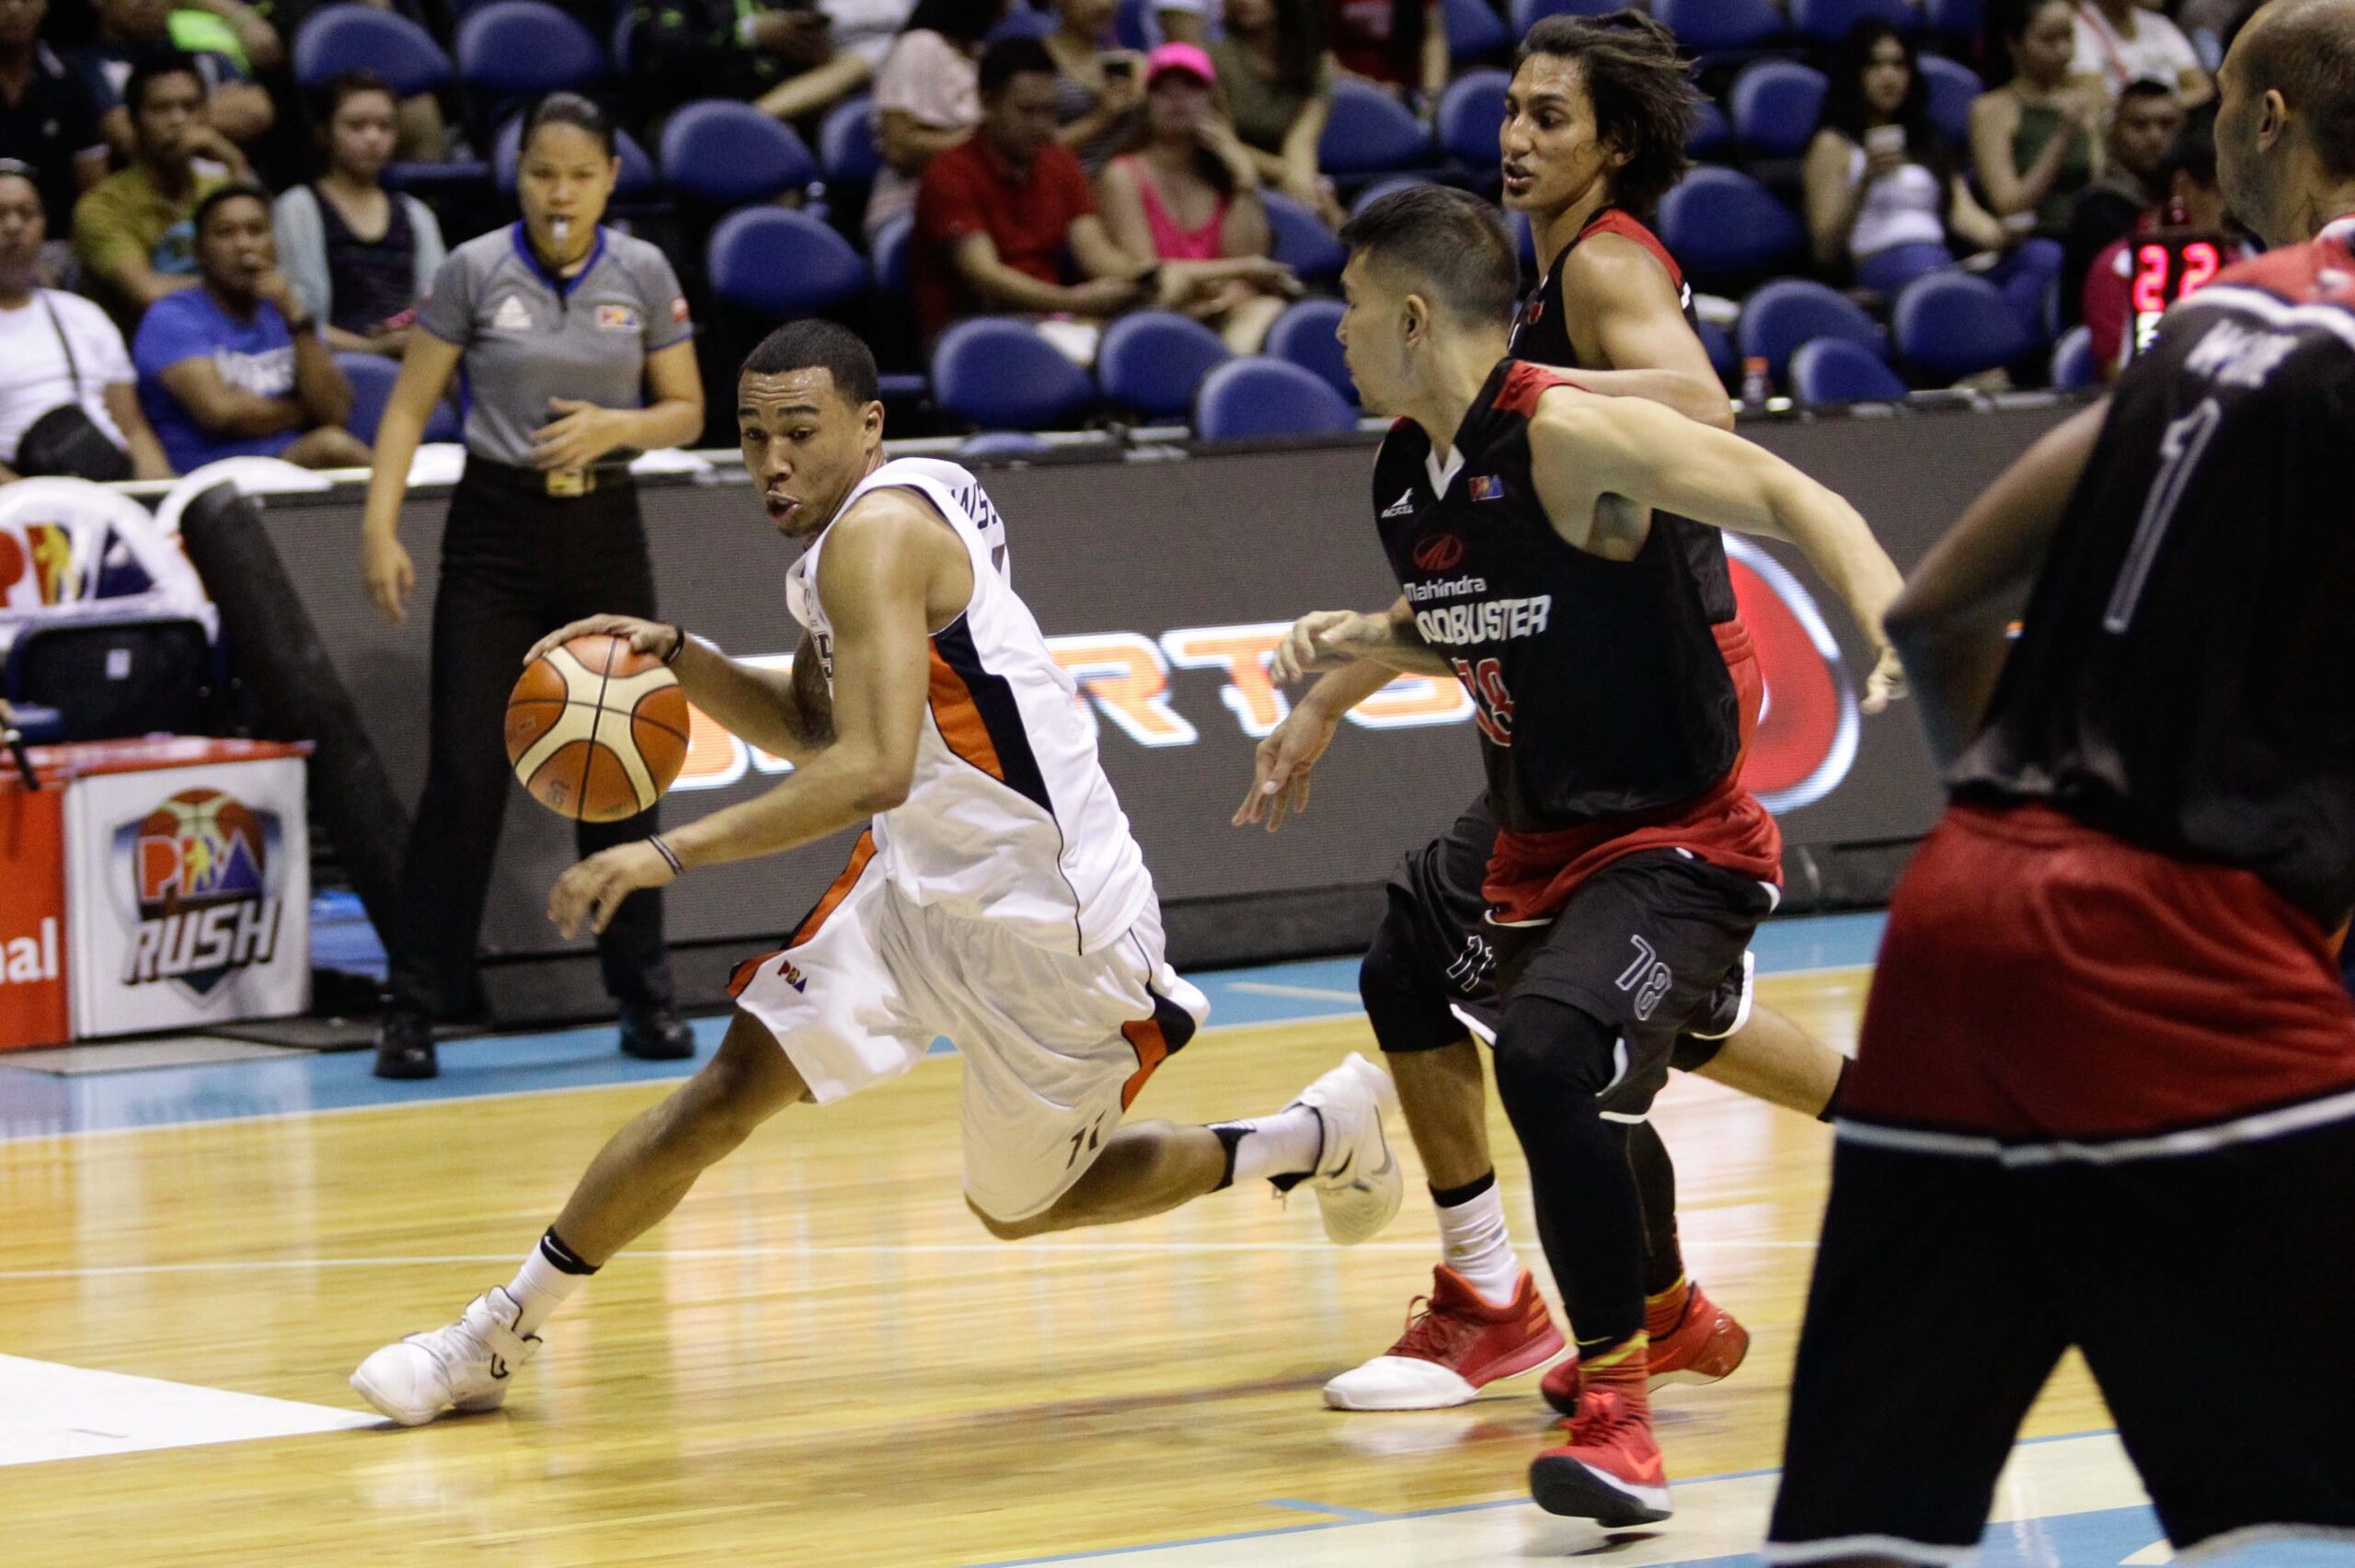 Meralco holds off Mahindra in Commissioner’s Cup opener